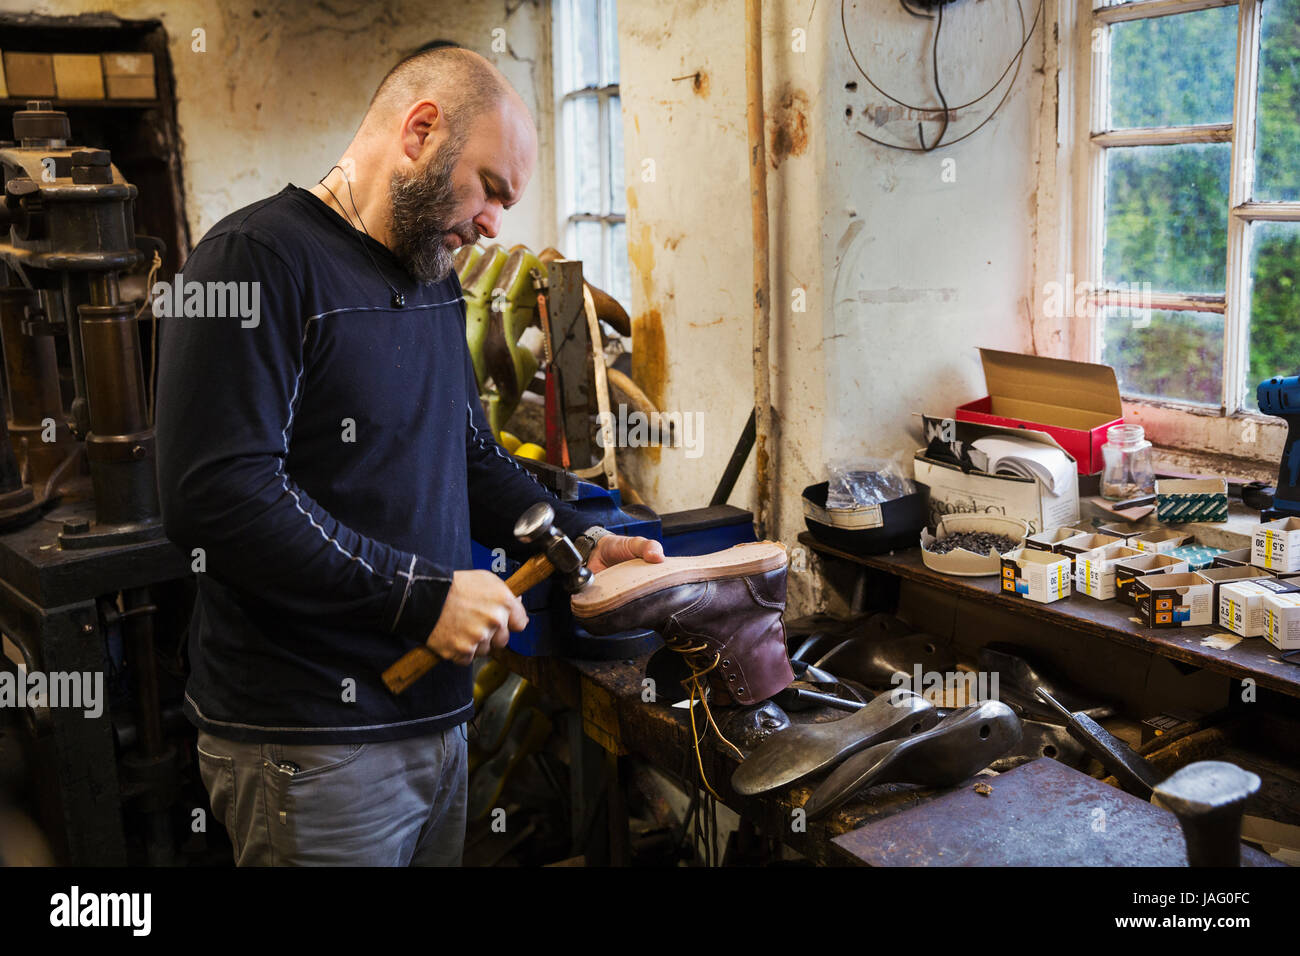 Man standing in a shoemaker's workshop by a window, using a hammer on the soles of a work boot. Stock Photo